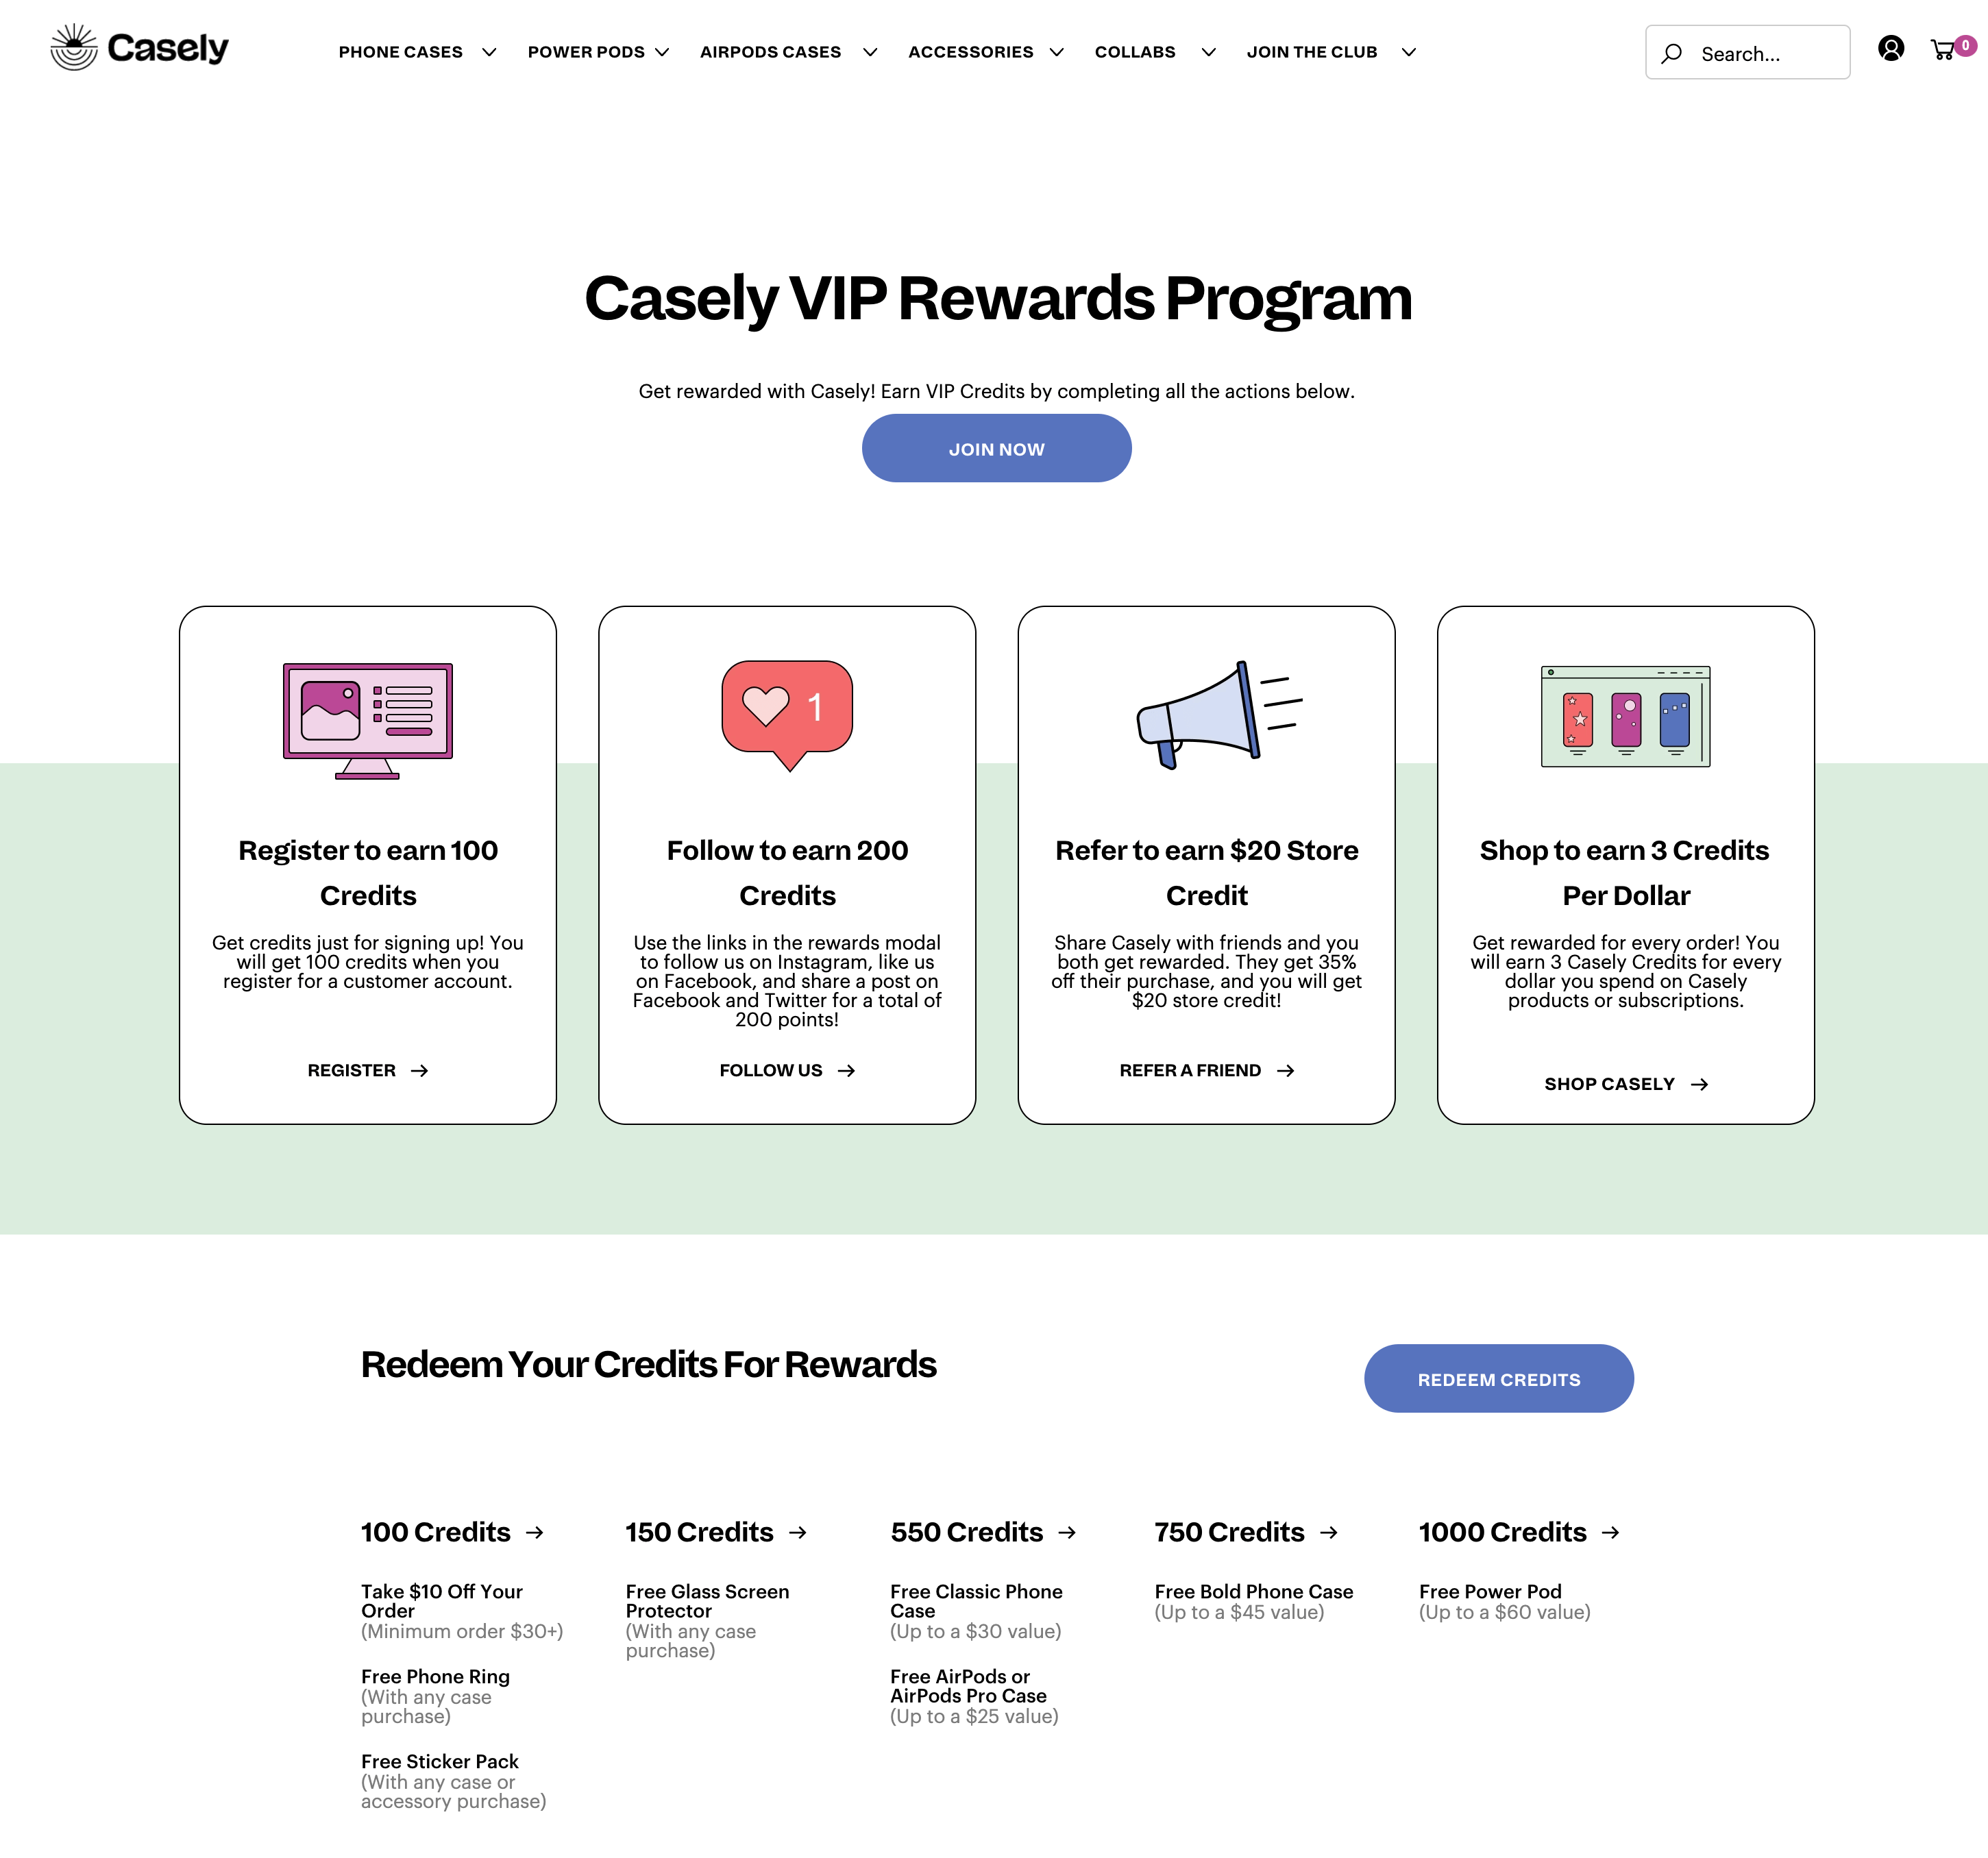 A screenshot of the Casely VIP Rewards Program’s explainer page showing the 4 ways to earn rewards and the various rewards available for certain amounts.